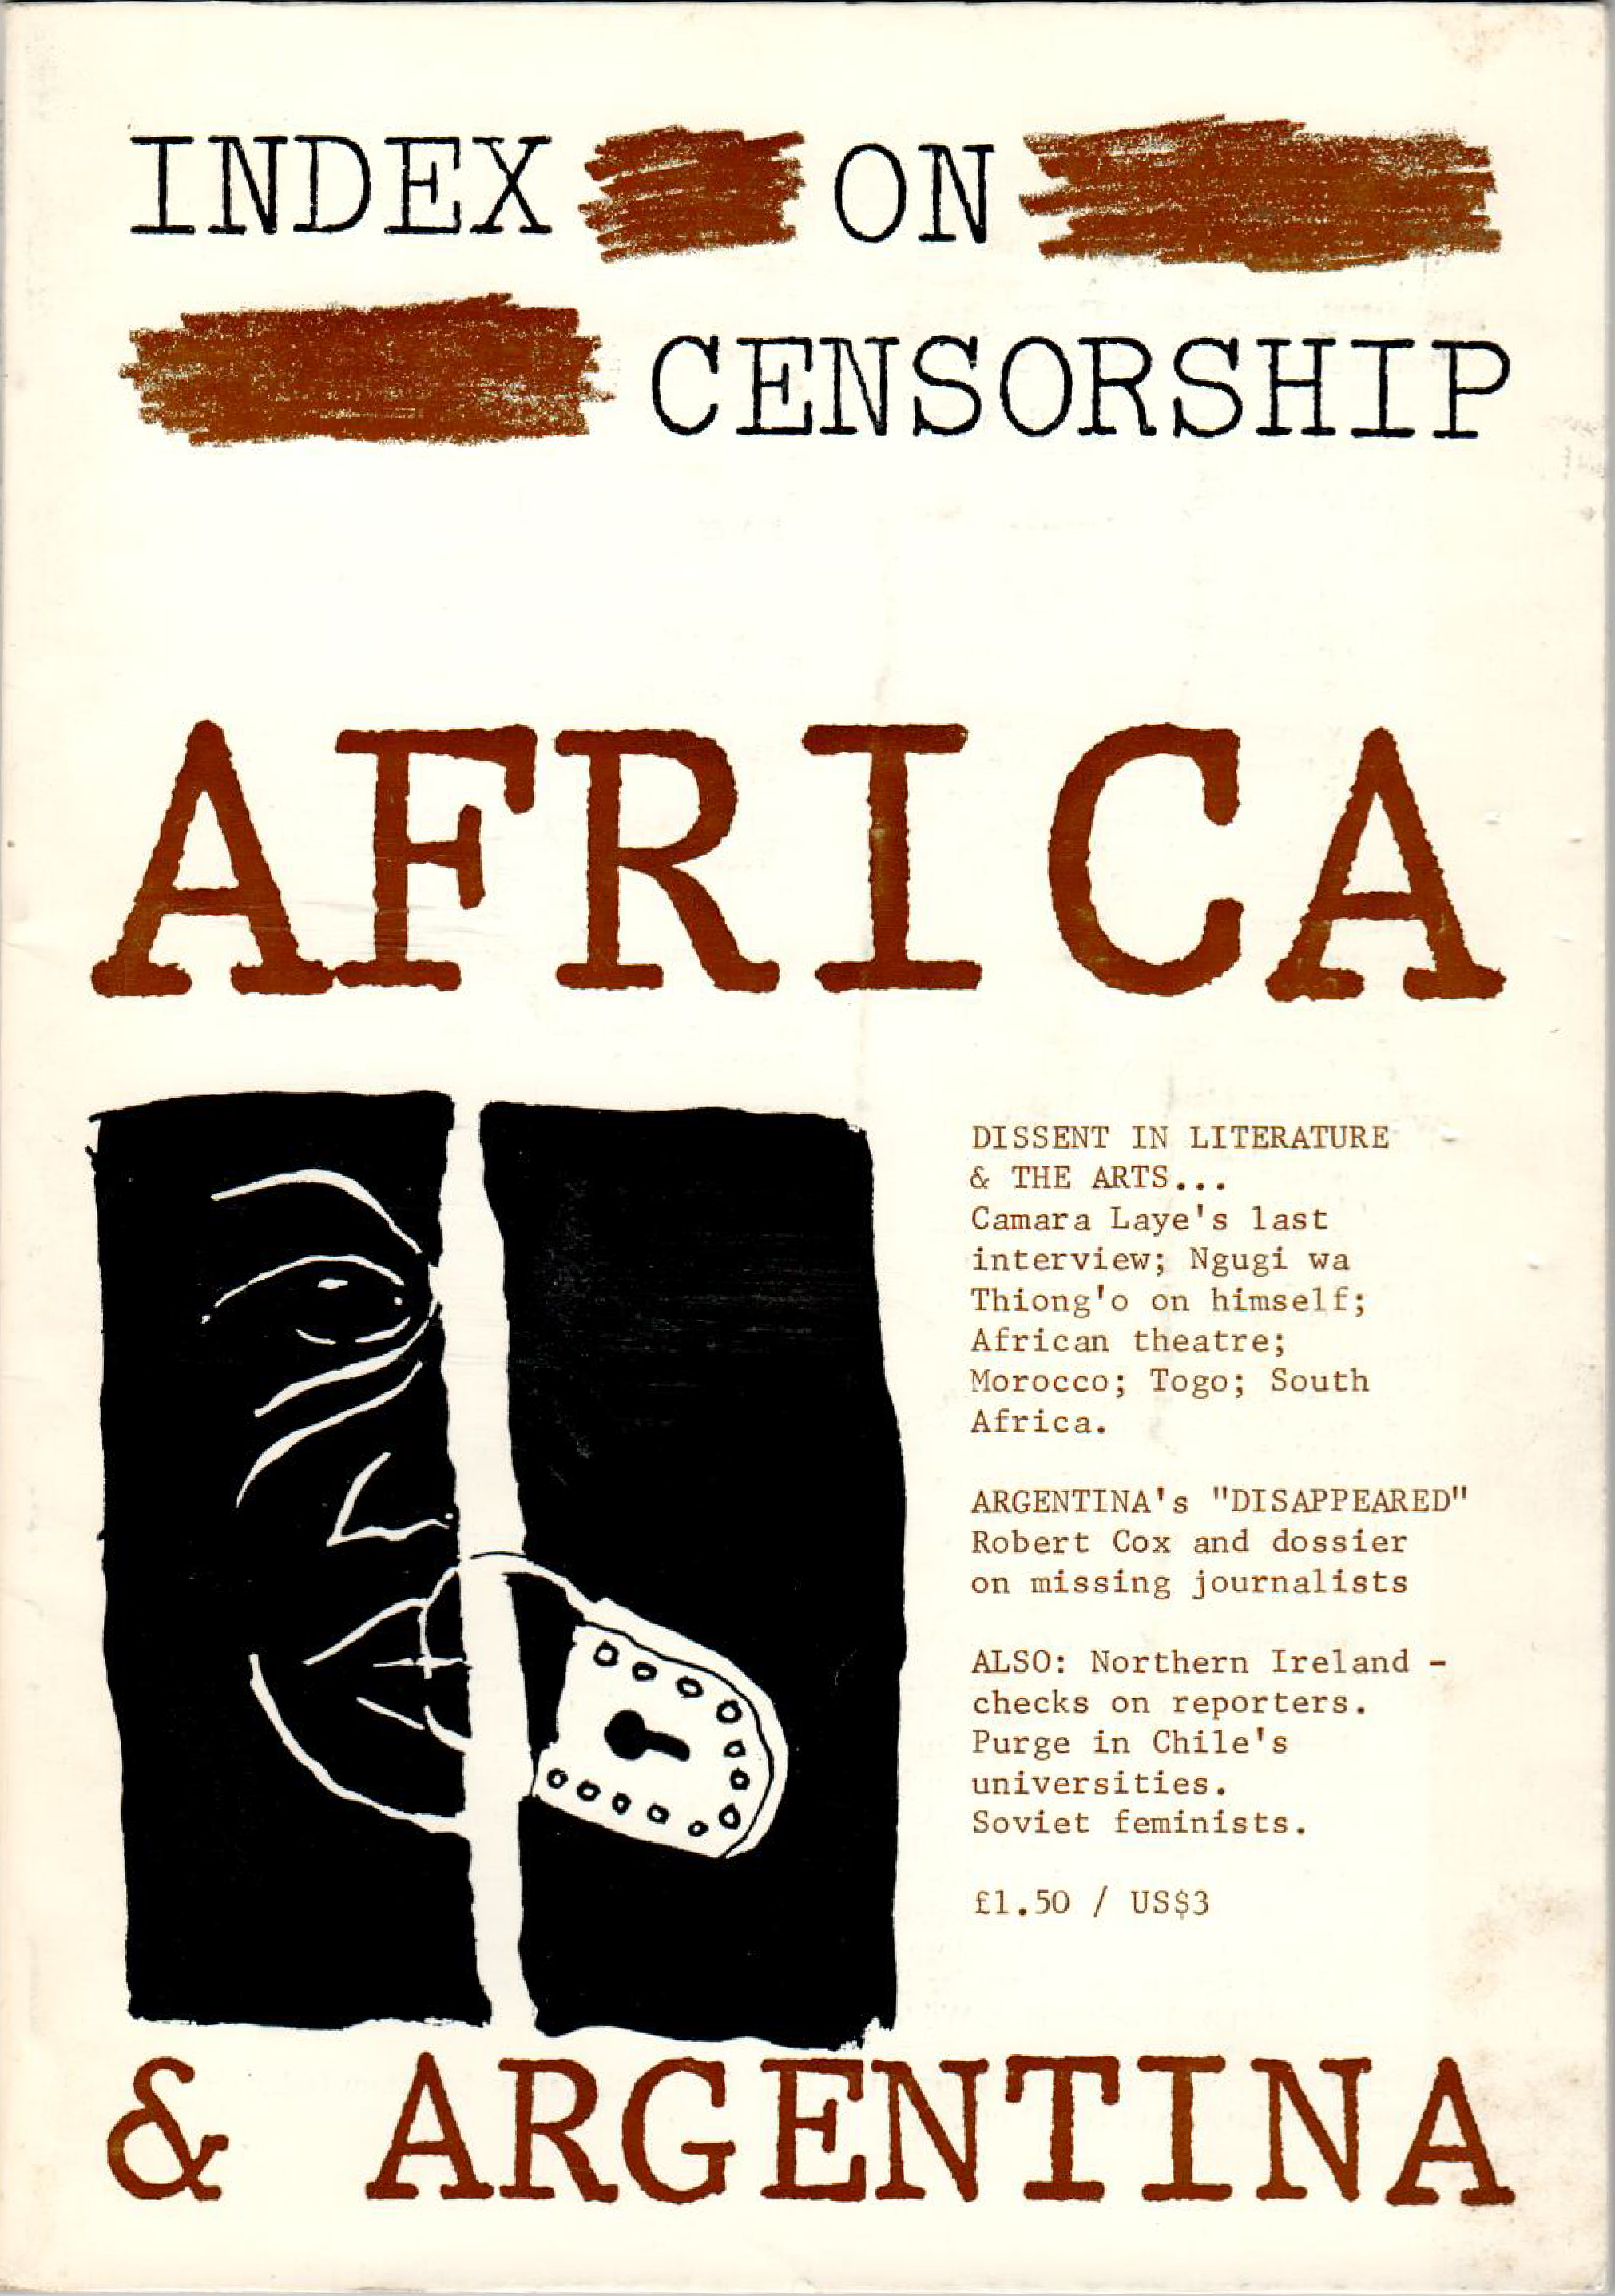 Africa & Argentina, the June 1980 issue of Index on Censorship magazine